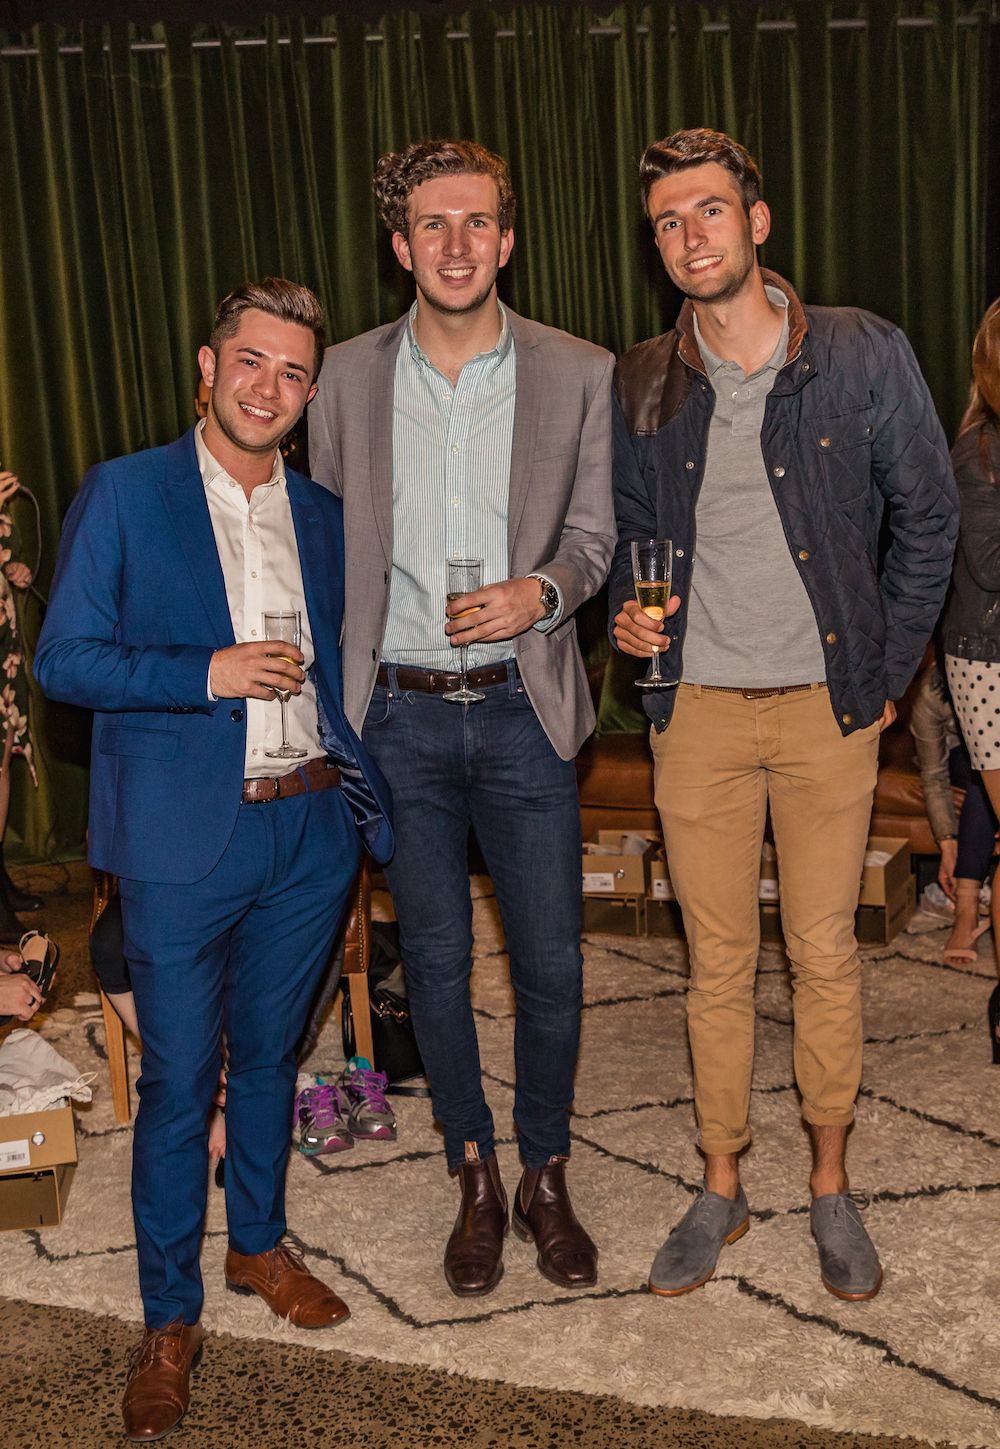 Bared_Footwear_Milliners_In_Manchester_Lane_Melbourne_CBD_Event_The_Boys